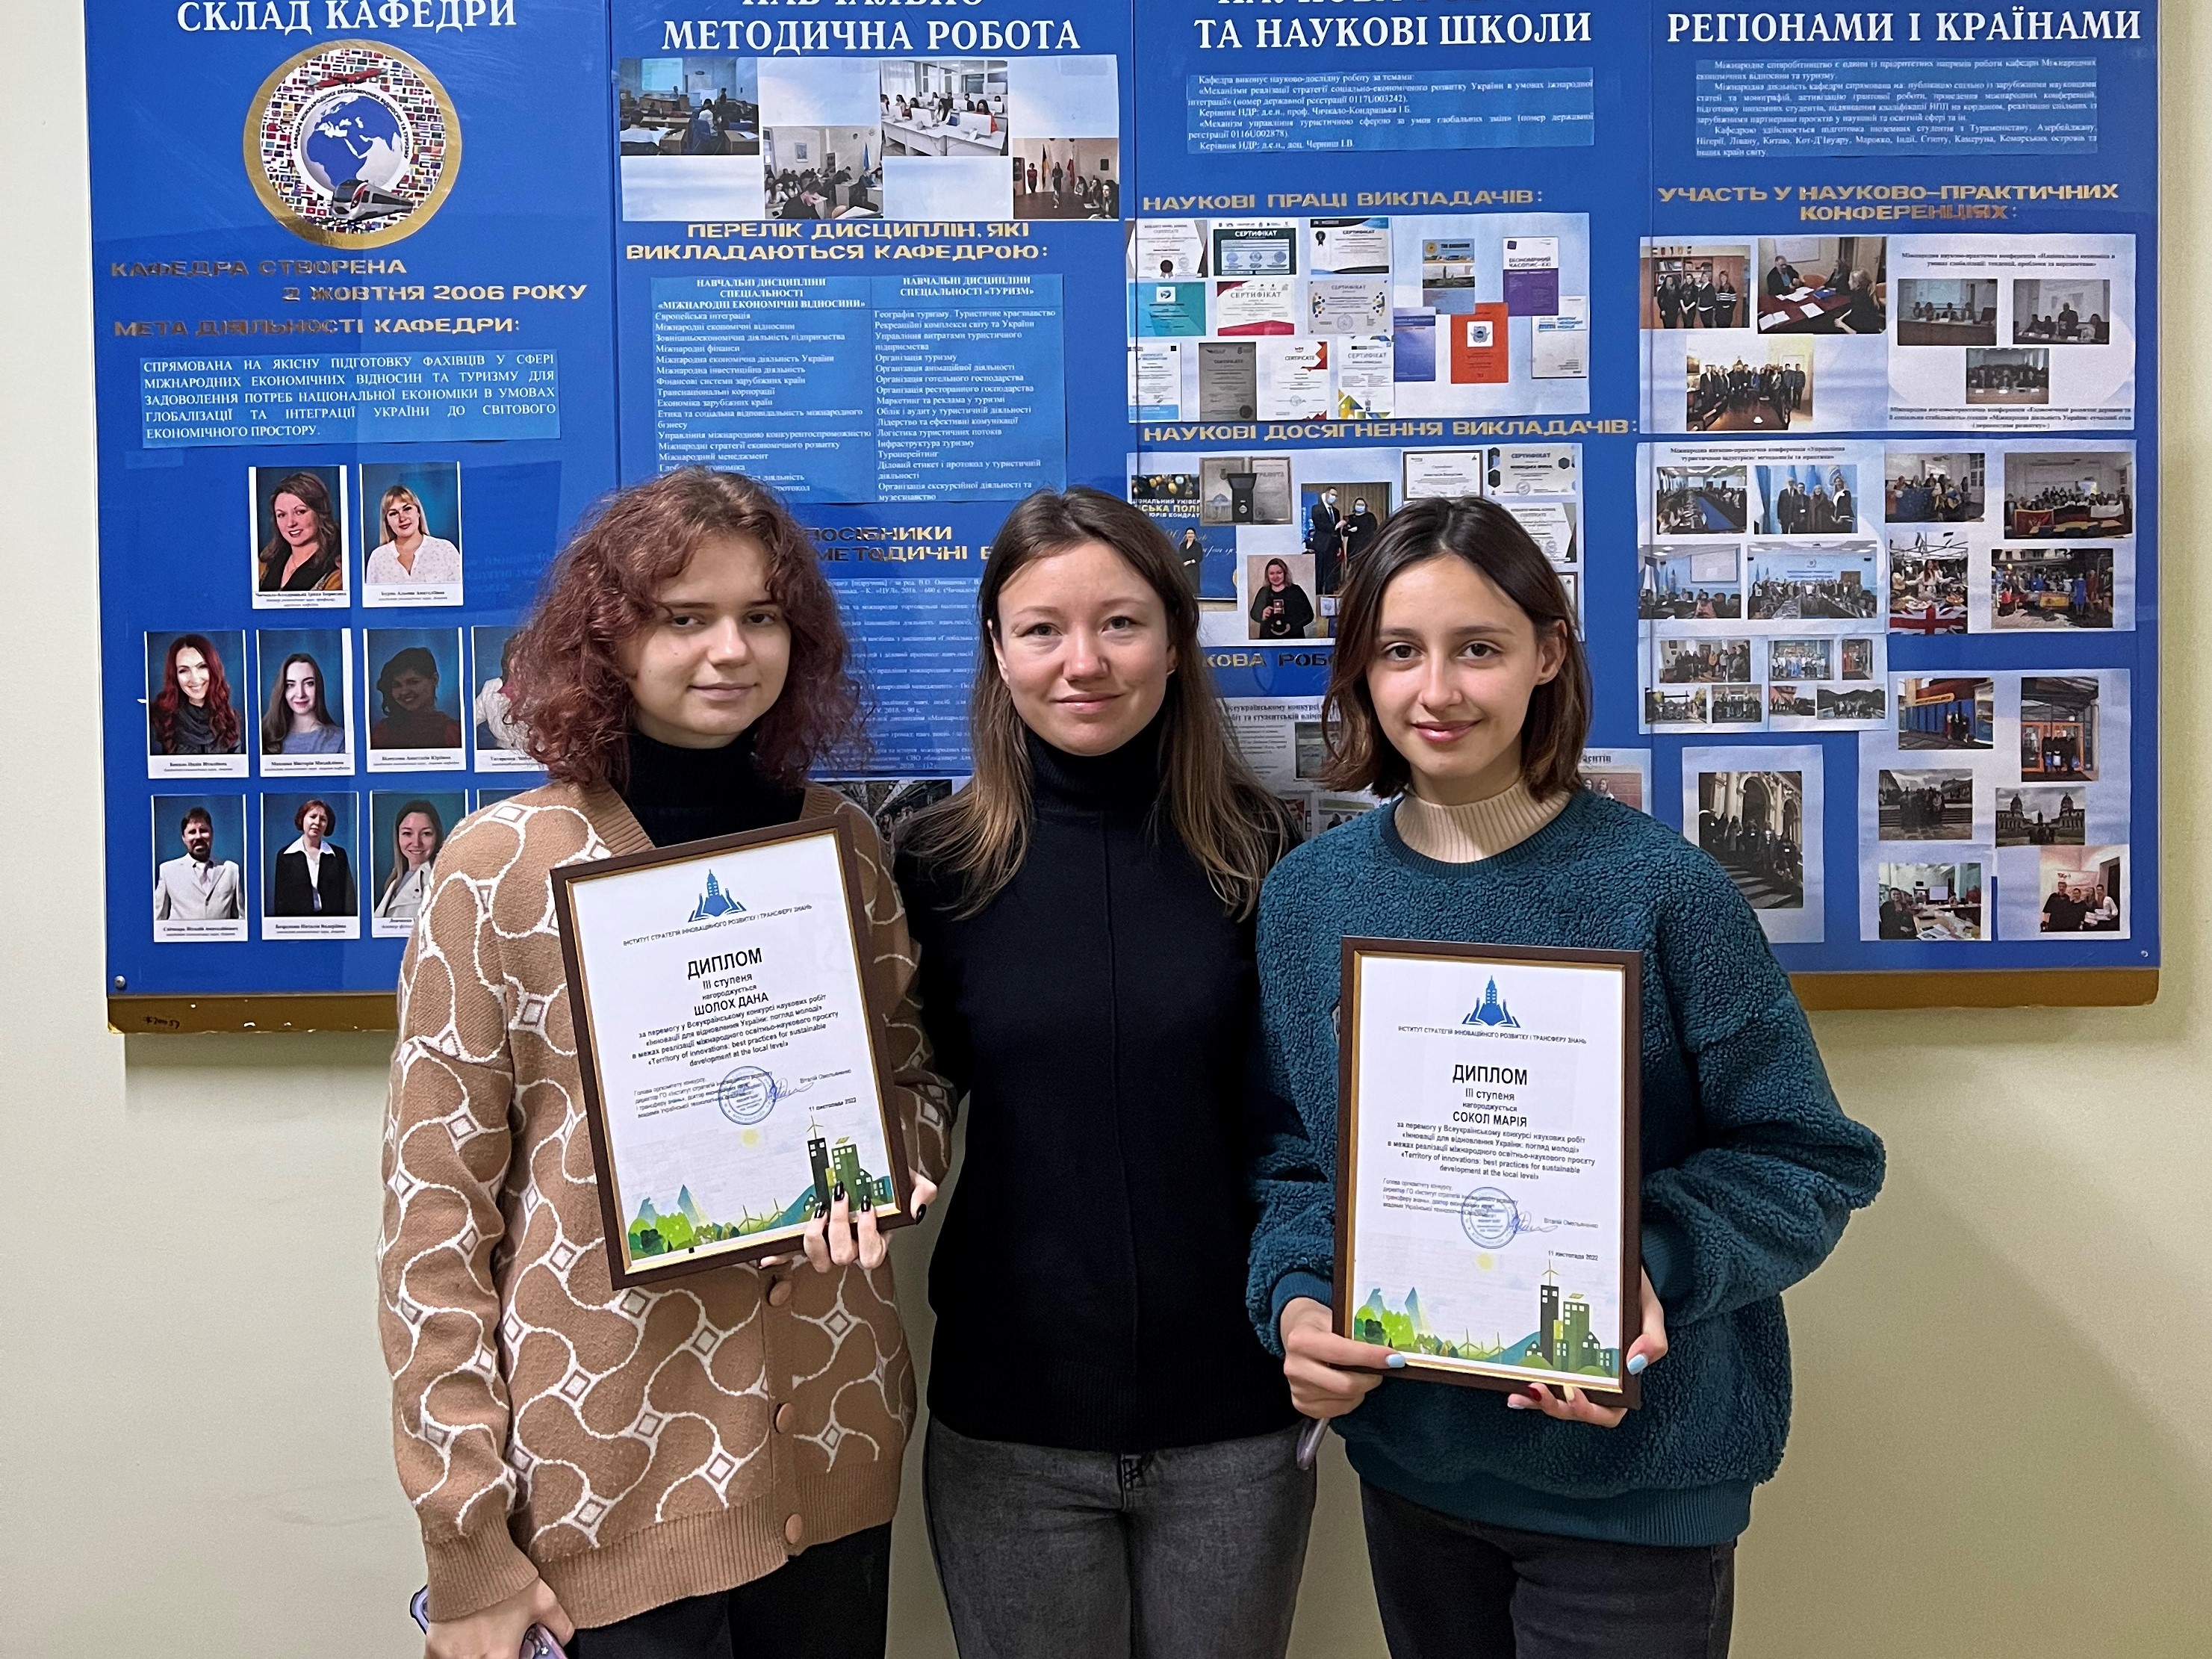 Polytechnic students become bronze medalists of the research paper competition "Innovations for the restoration of Ukraine: the view of the youth"